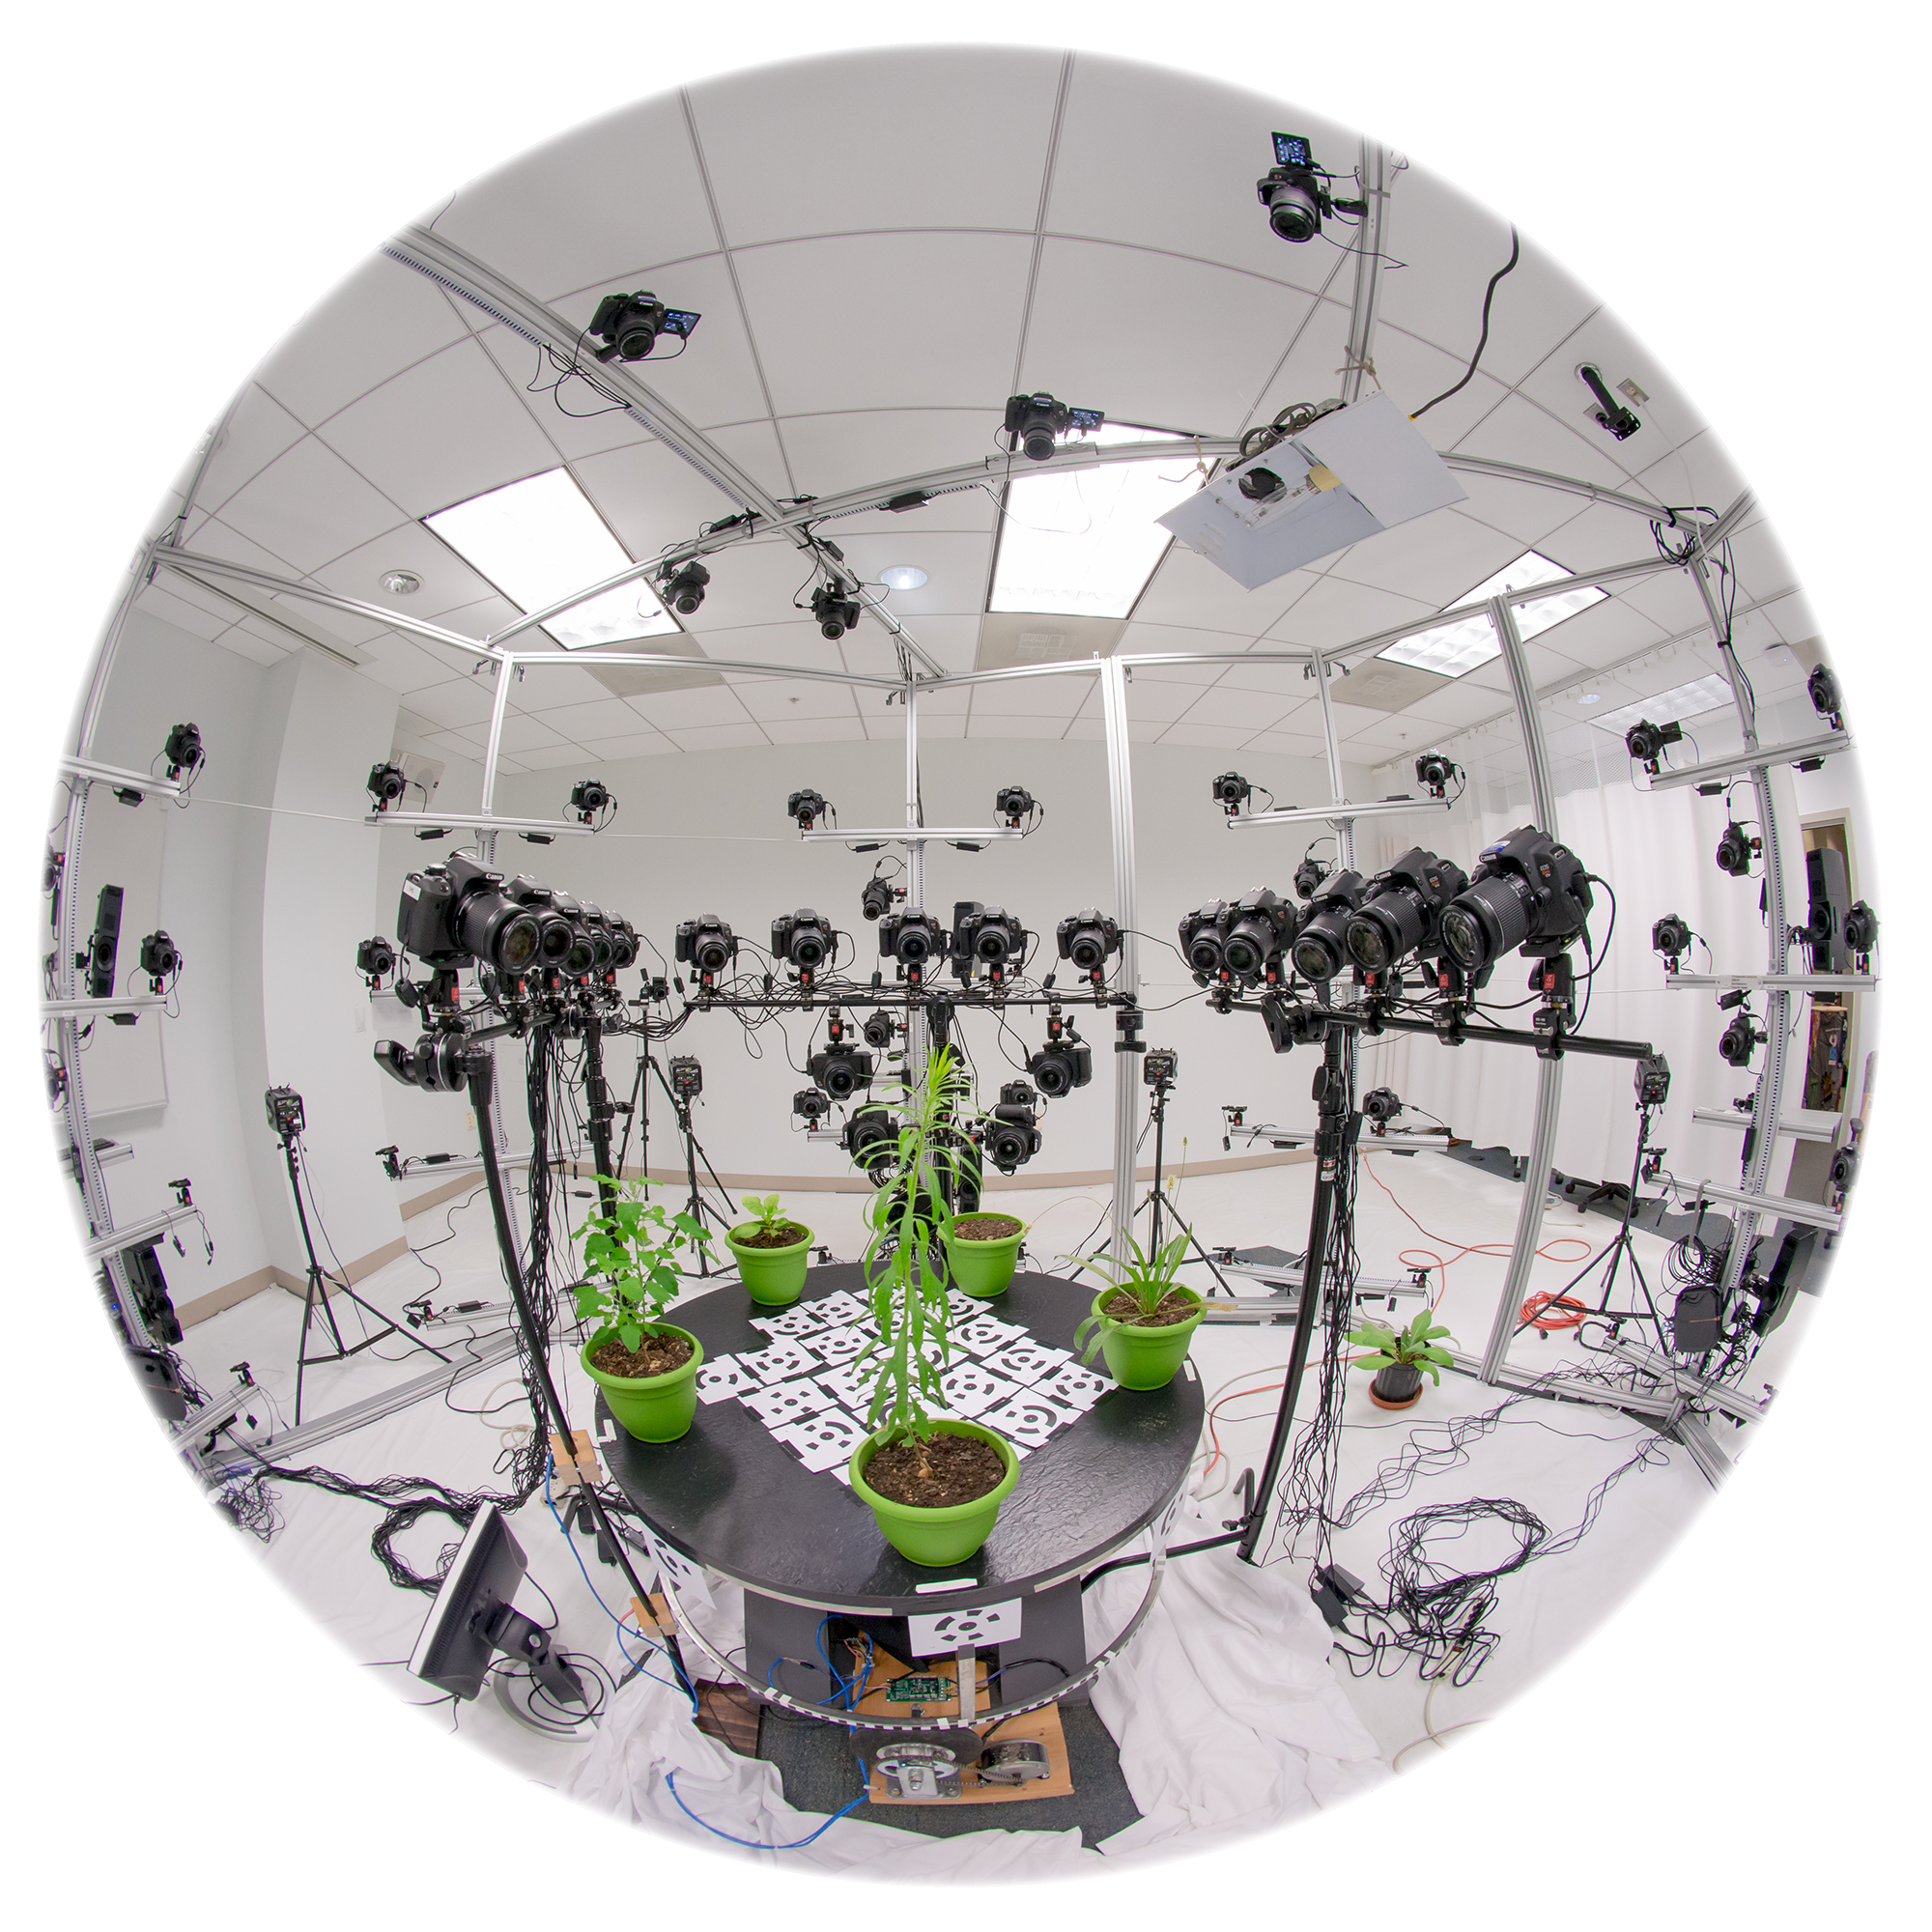 A fish-eye photograph of plants being set up in the Photogrammetry rig.